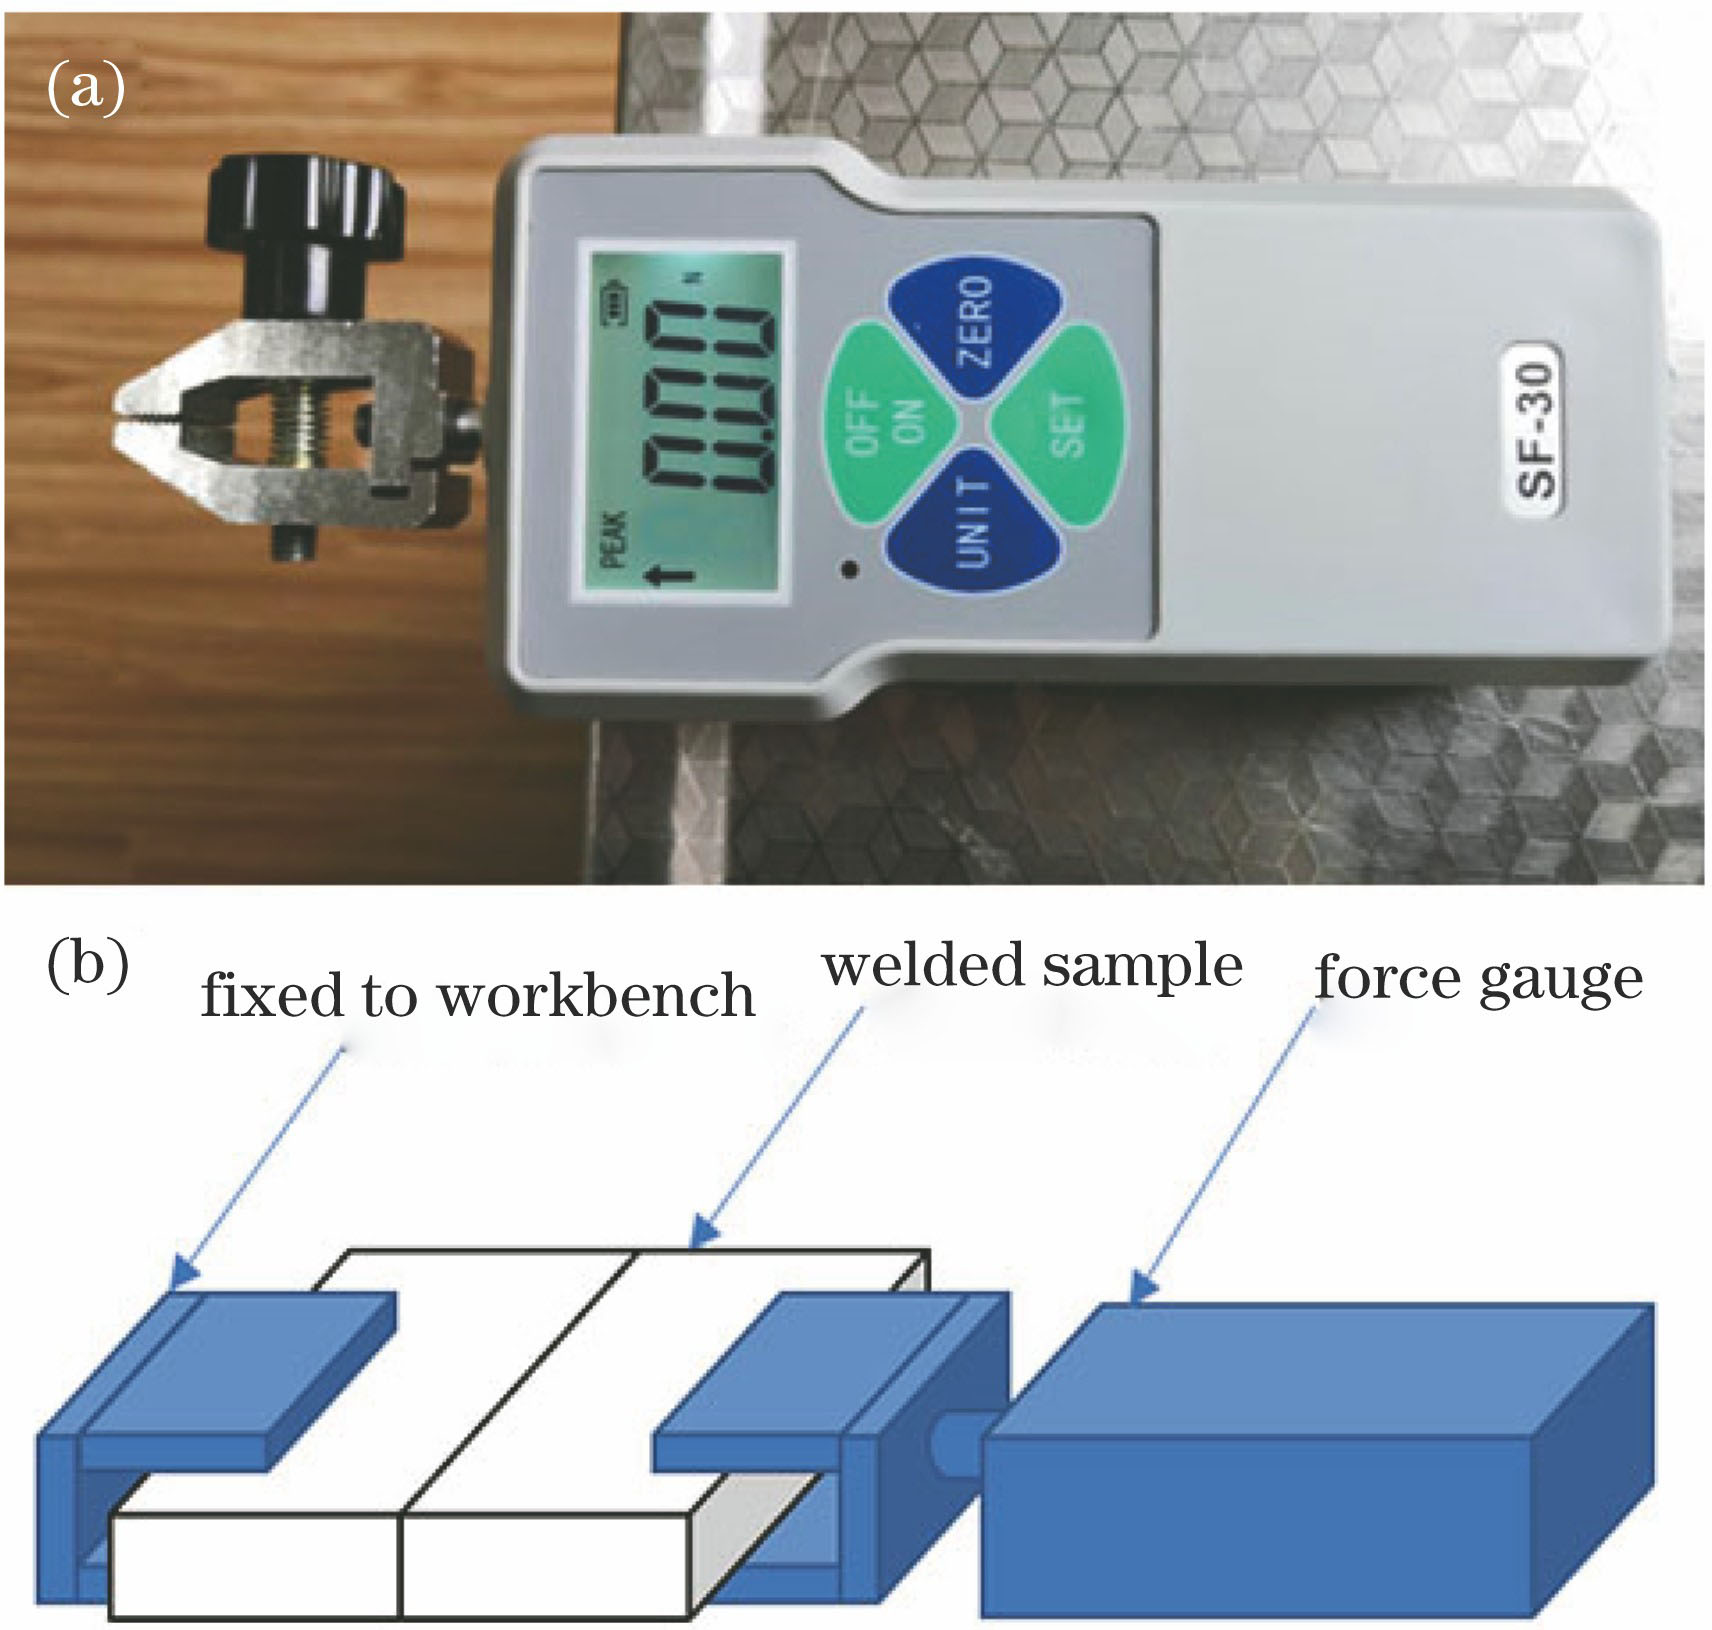 Test instrument and test processing. (a) Digital explicit push-pull force meter for measuring tensile strength; (b) diagram of process for measuring tensile strength